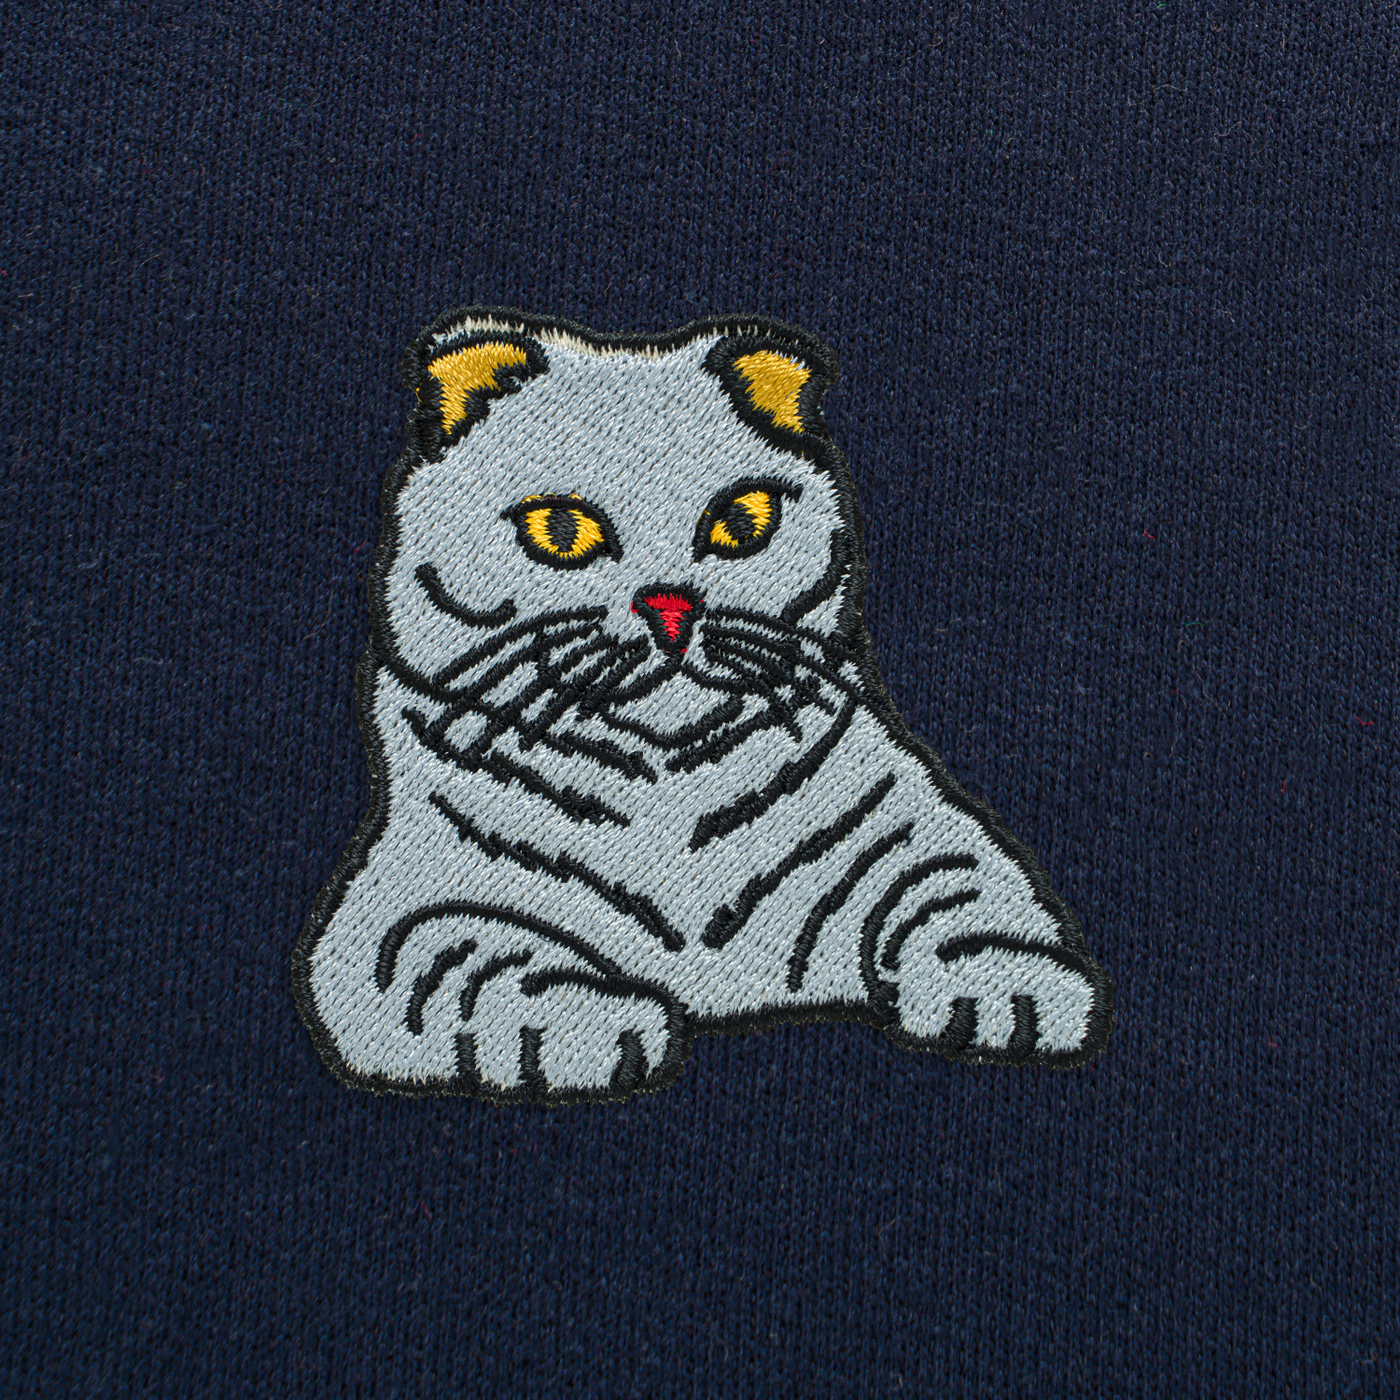 Bobby's Planet Women's Embroidered Scottish Fold Sweatshirt from Paws Dog Cat Animals Collection in Navy Color#color_navy